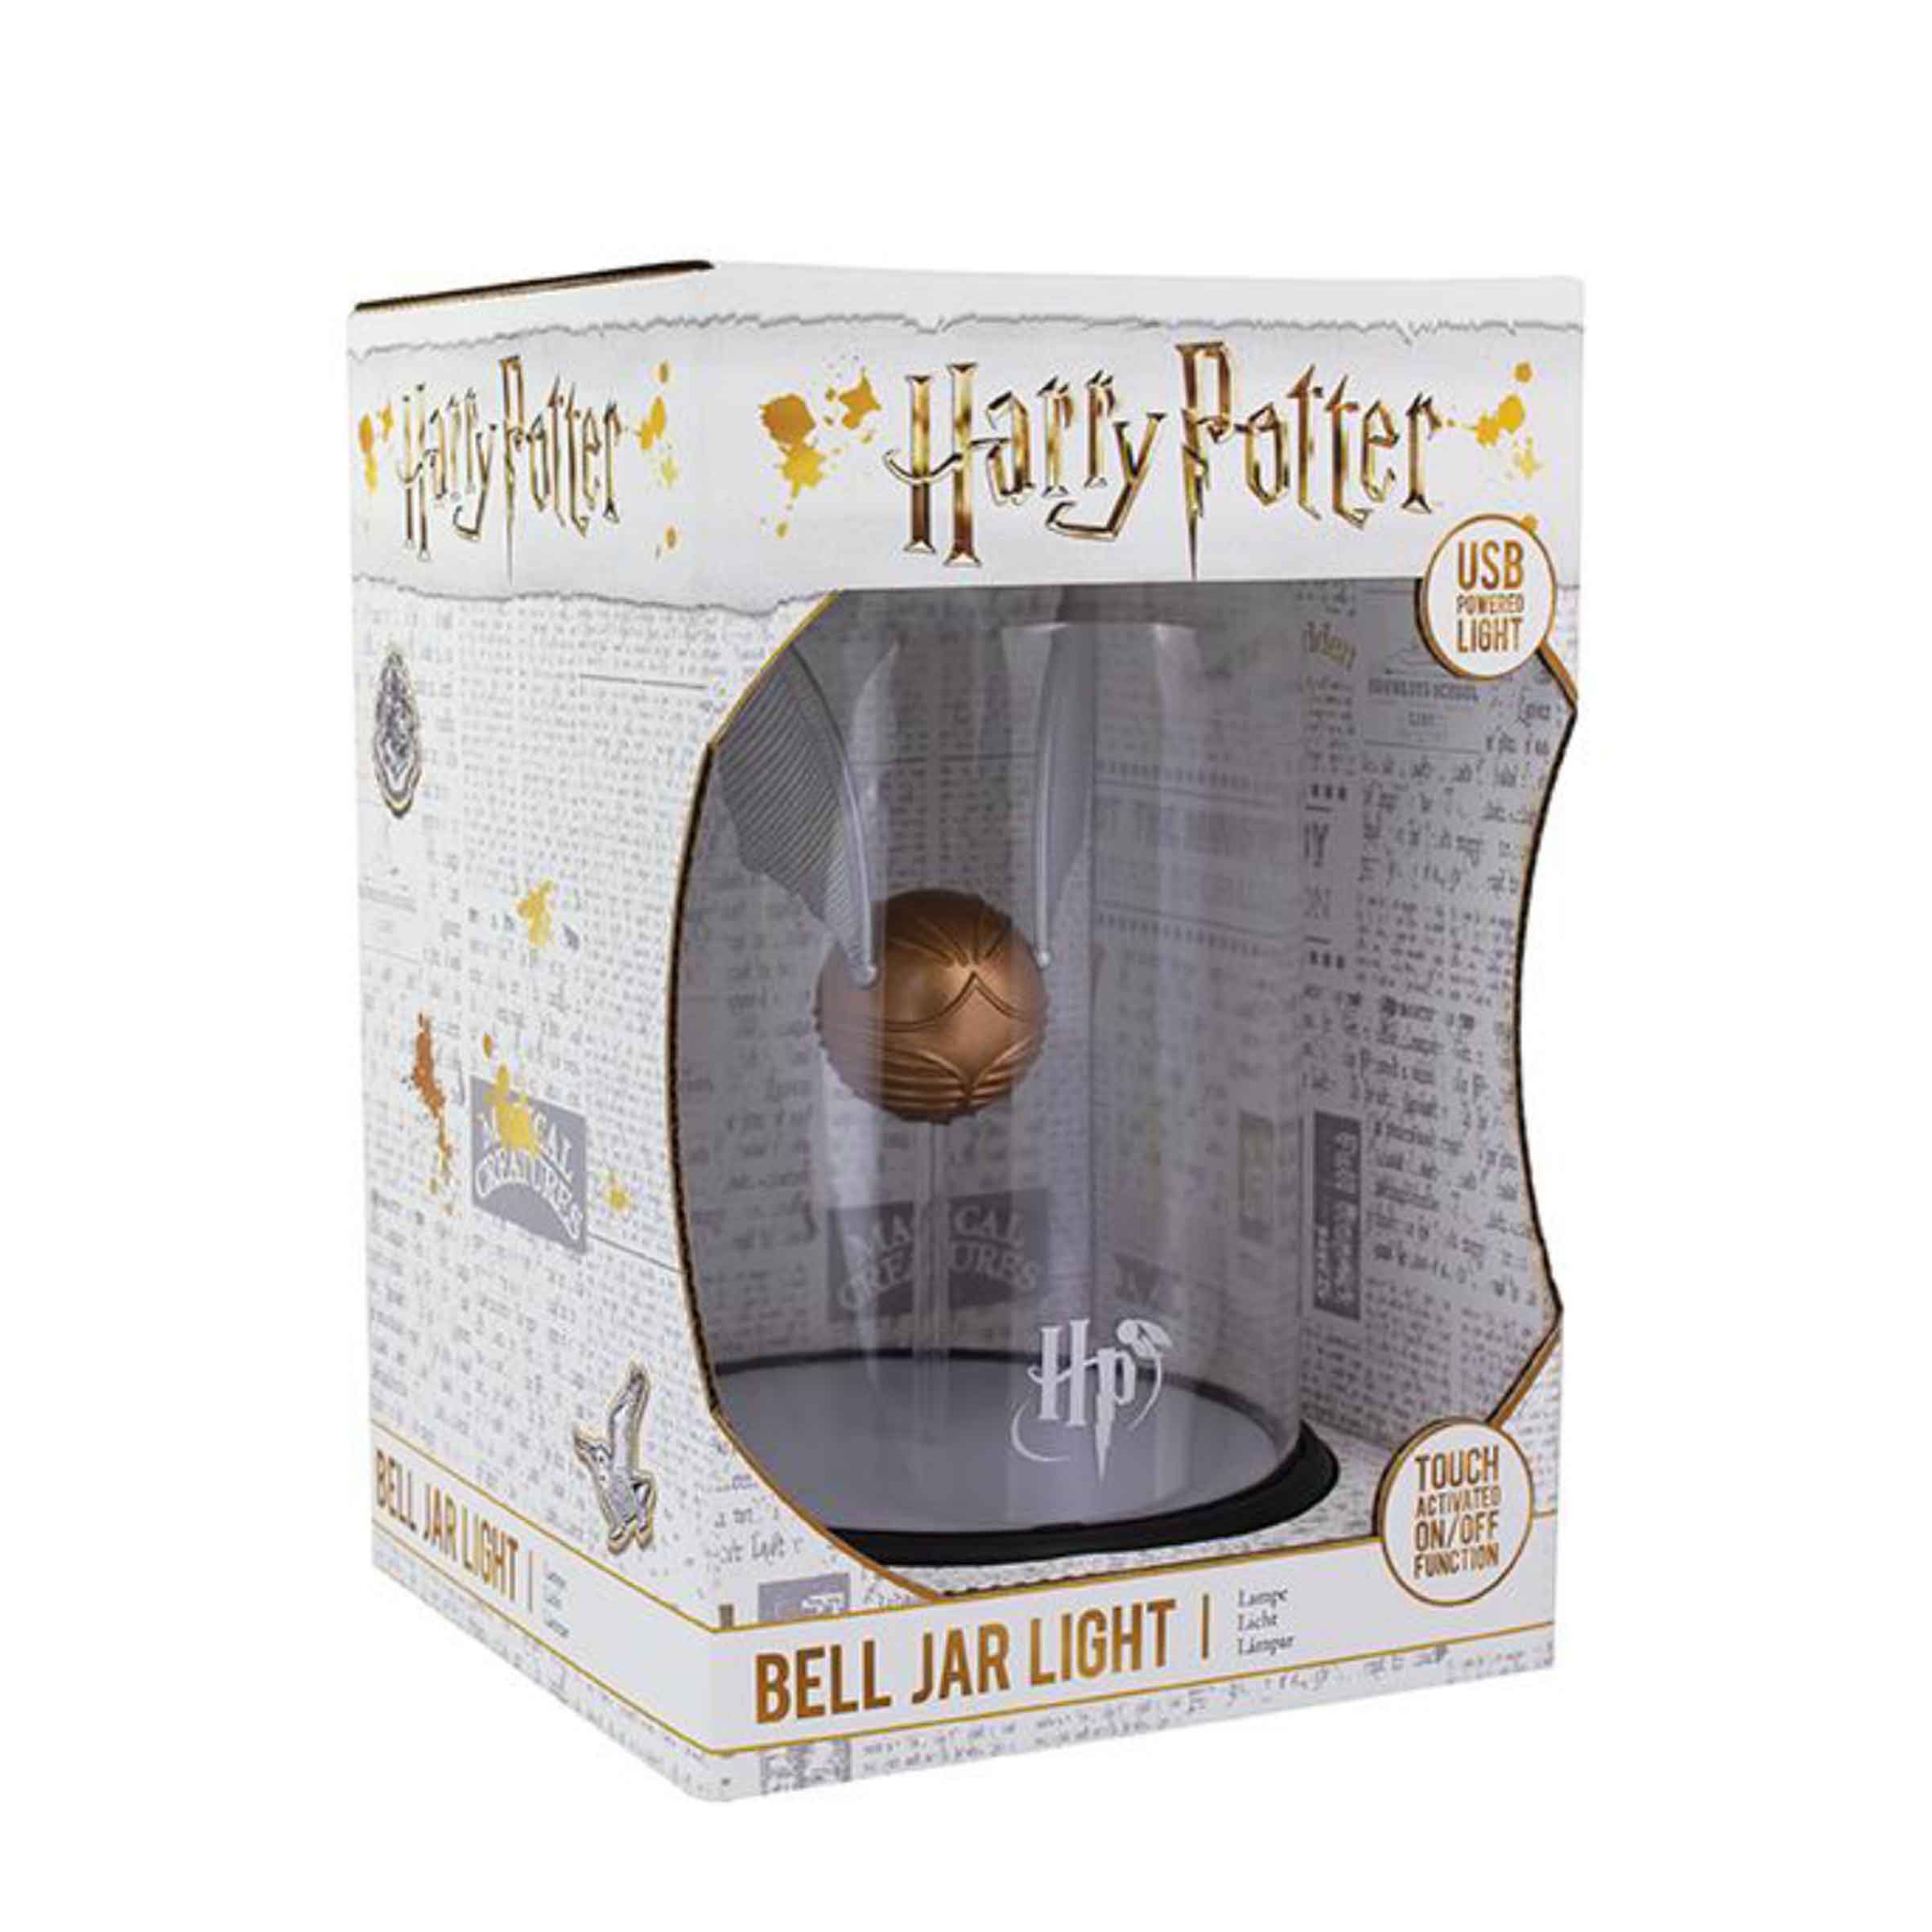 Harry Potter Golden Snitch Light - Table Lamp - Level Up